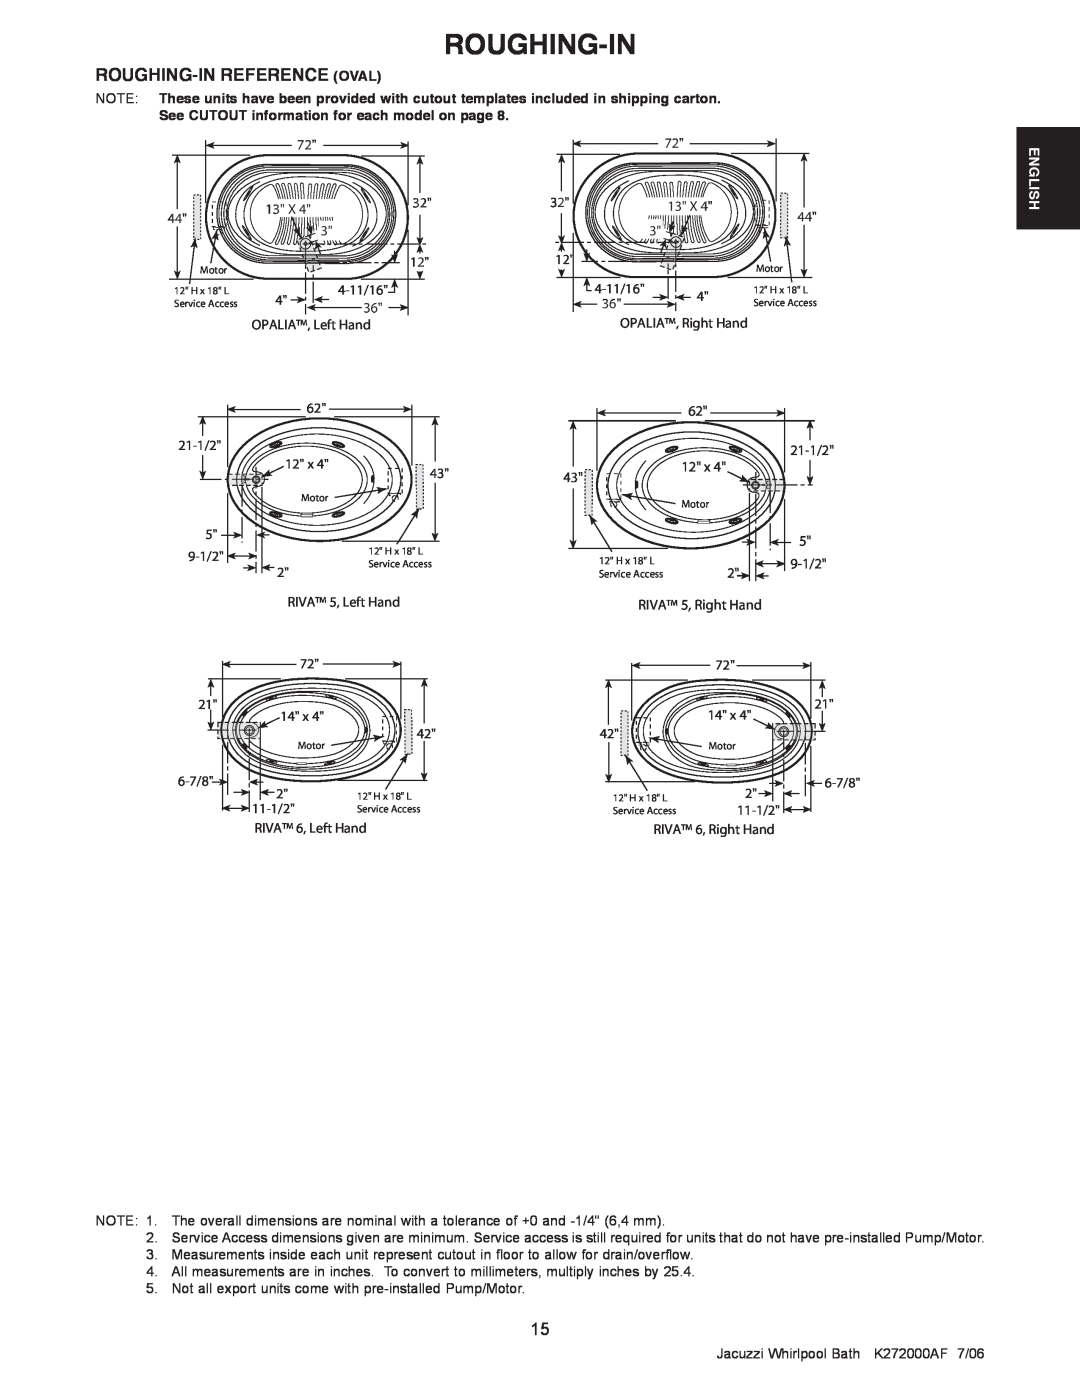 Jacuzzi K272000AF 7/06 Roughing-In Reference Oval, See CUTOUT information for each model on page, OPALIA, Left Hand 